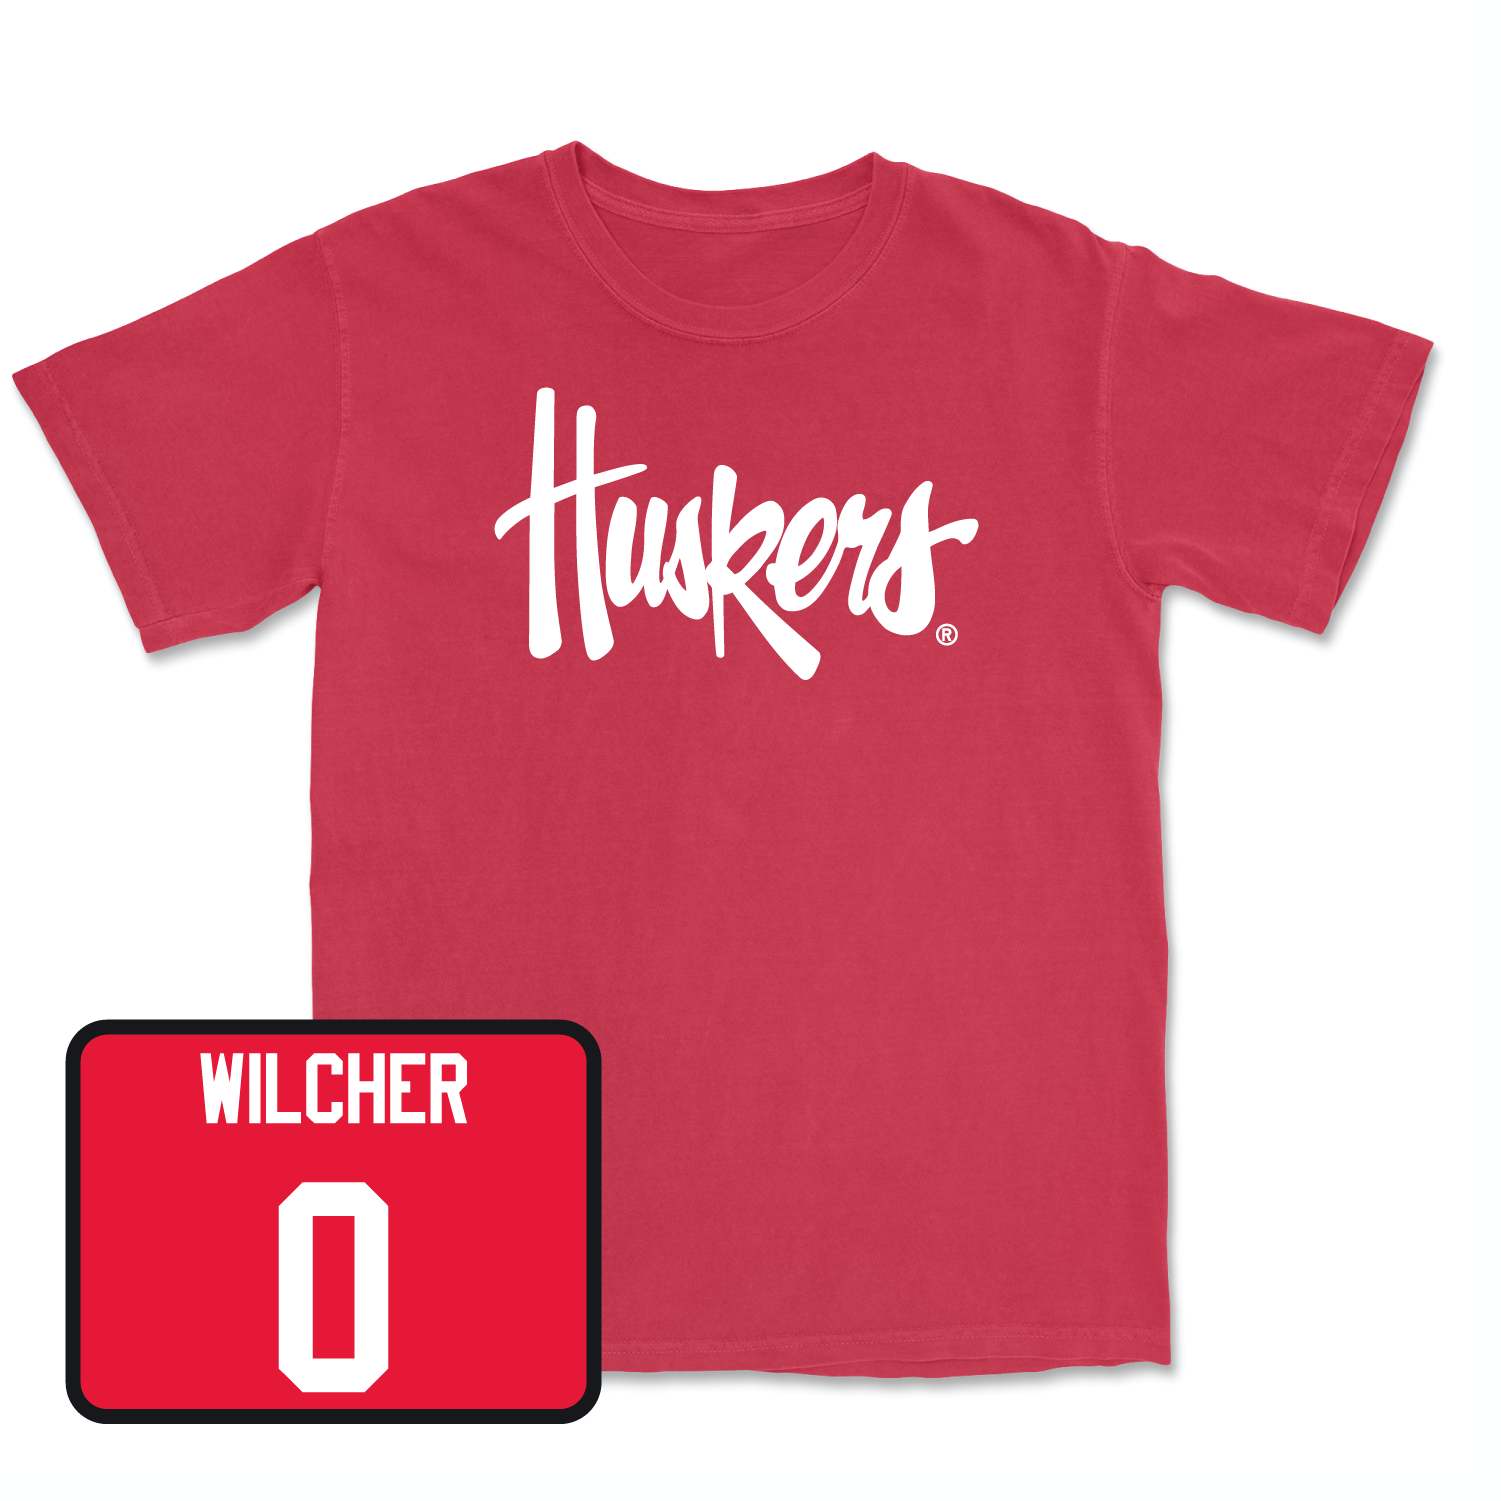 Red Men's Basketball Huskers Tee Large / C.J. Wilcher | #0